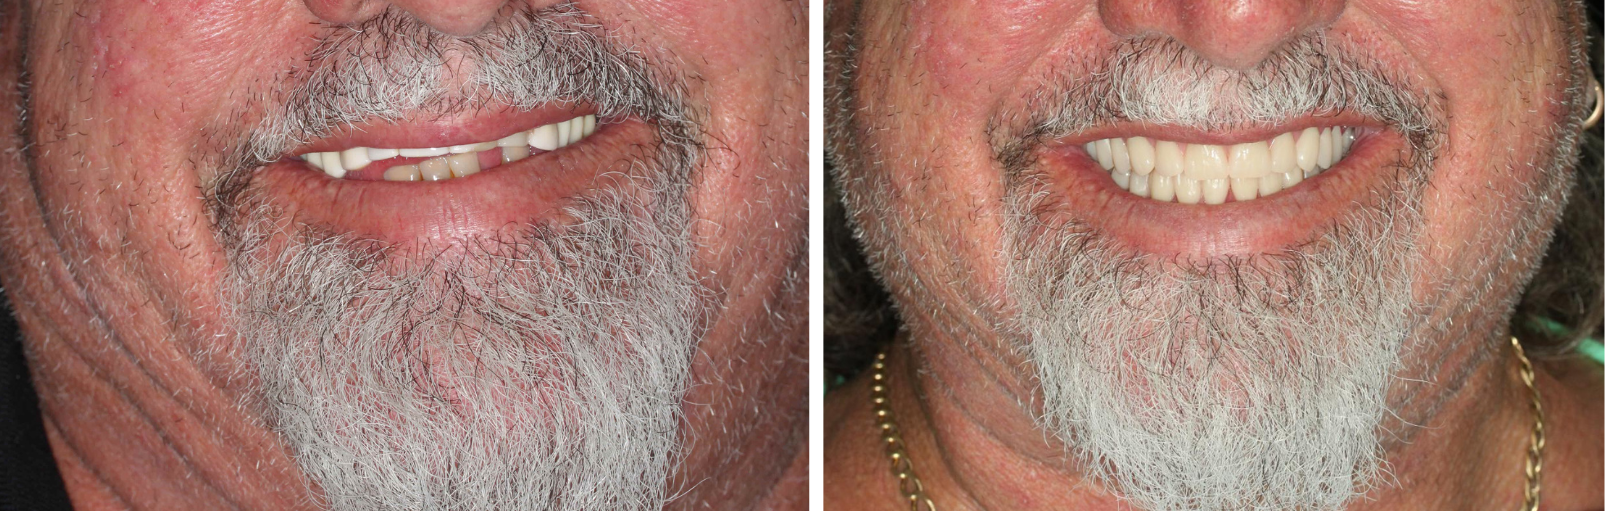 Case 2 Before and after - Snap-in Denture